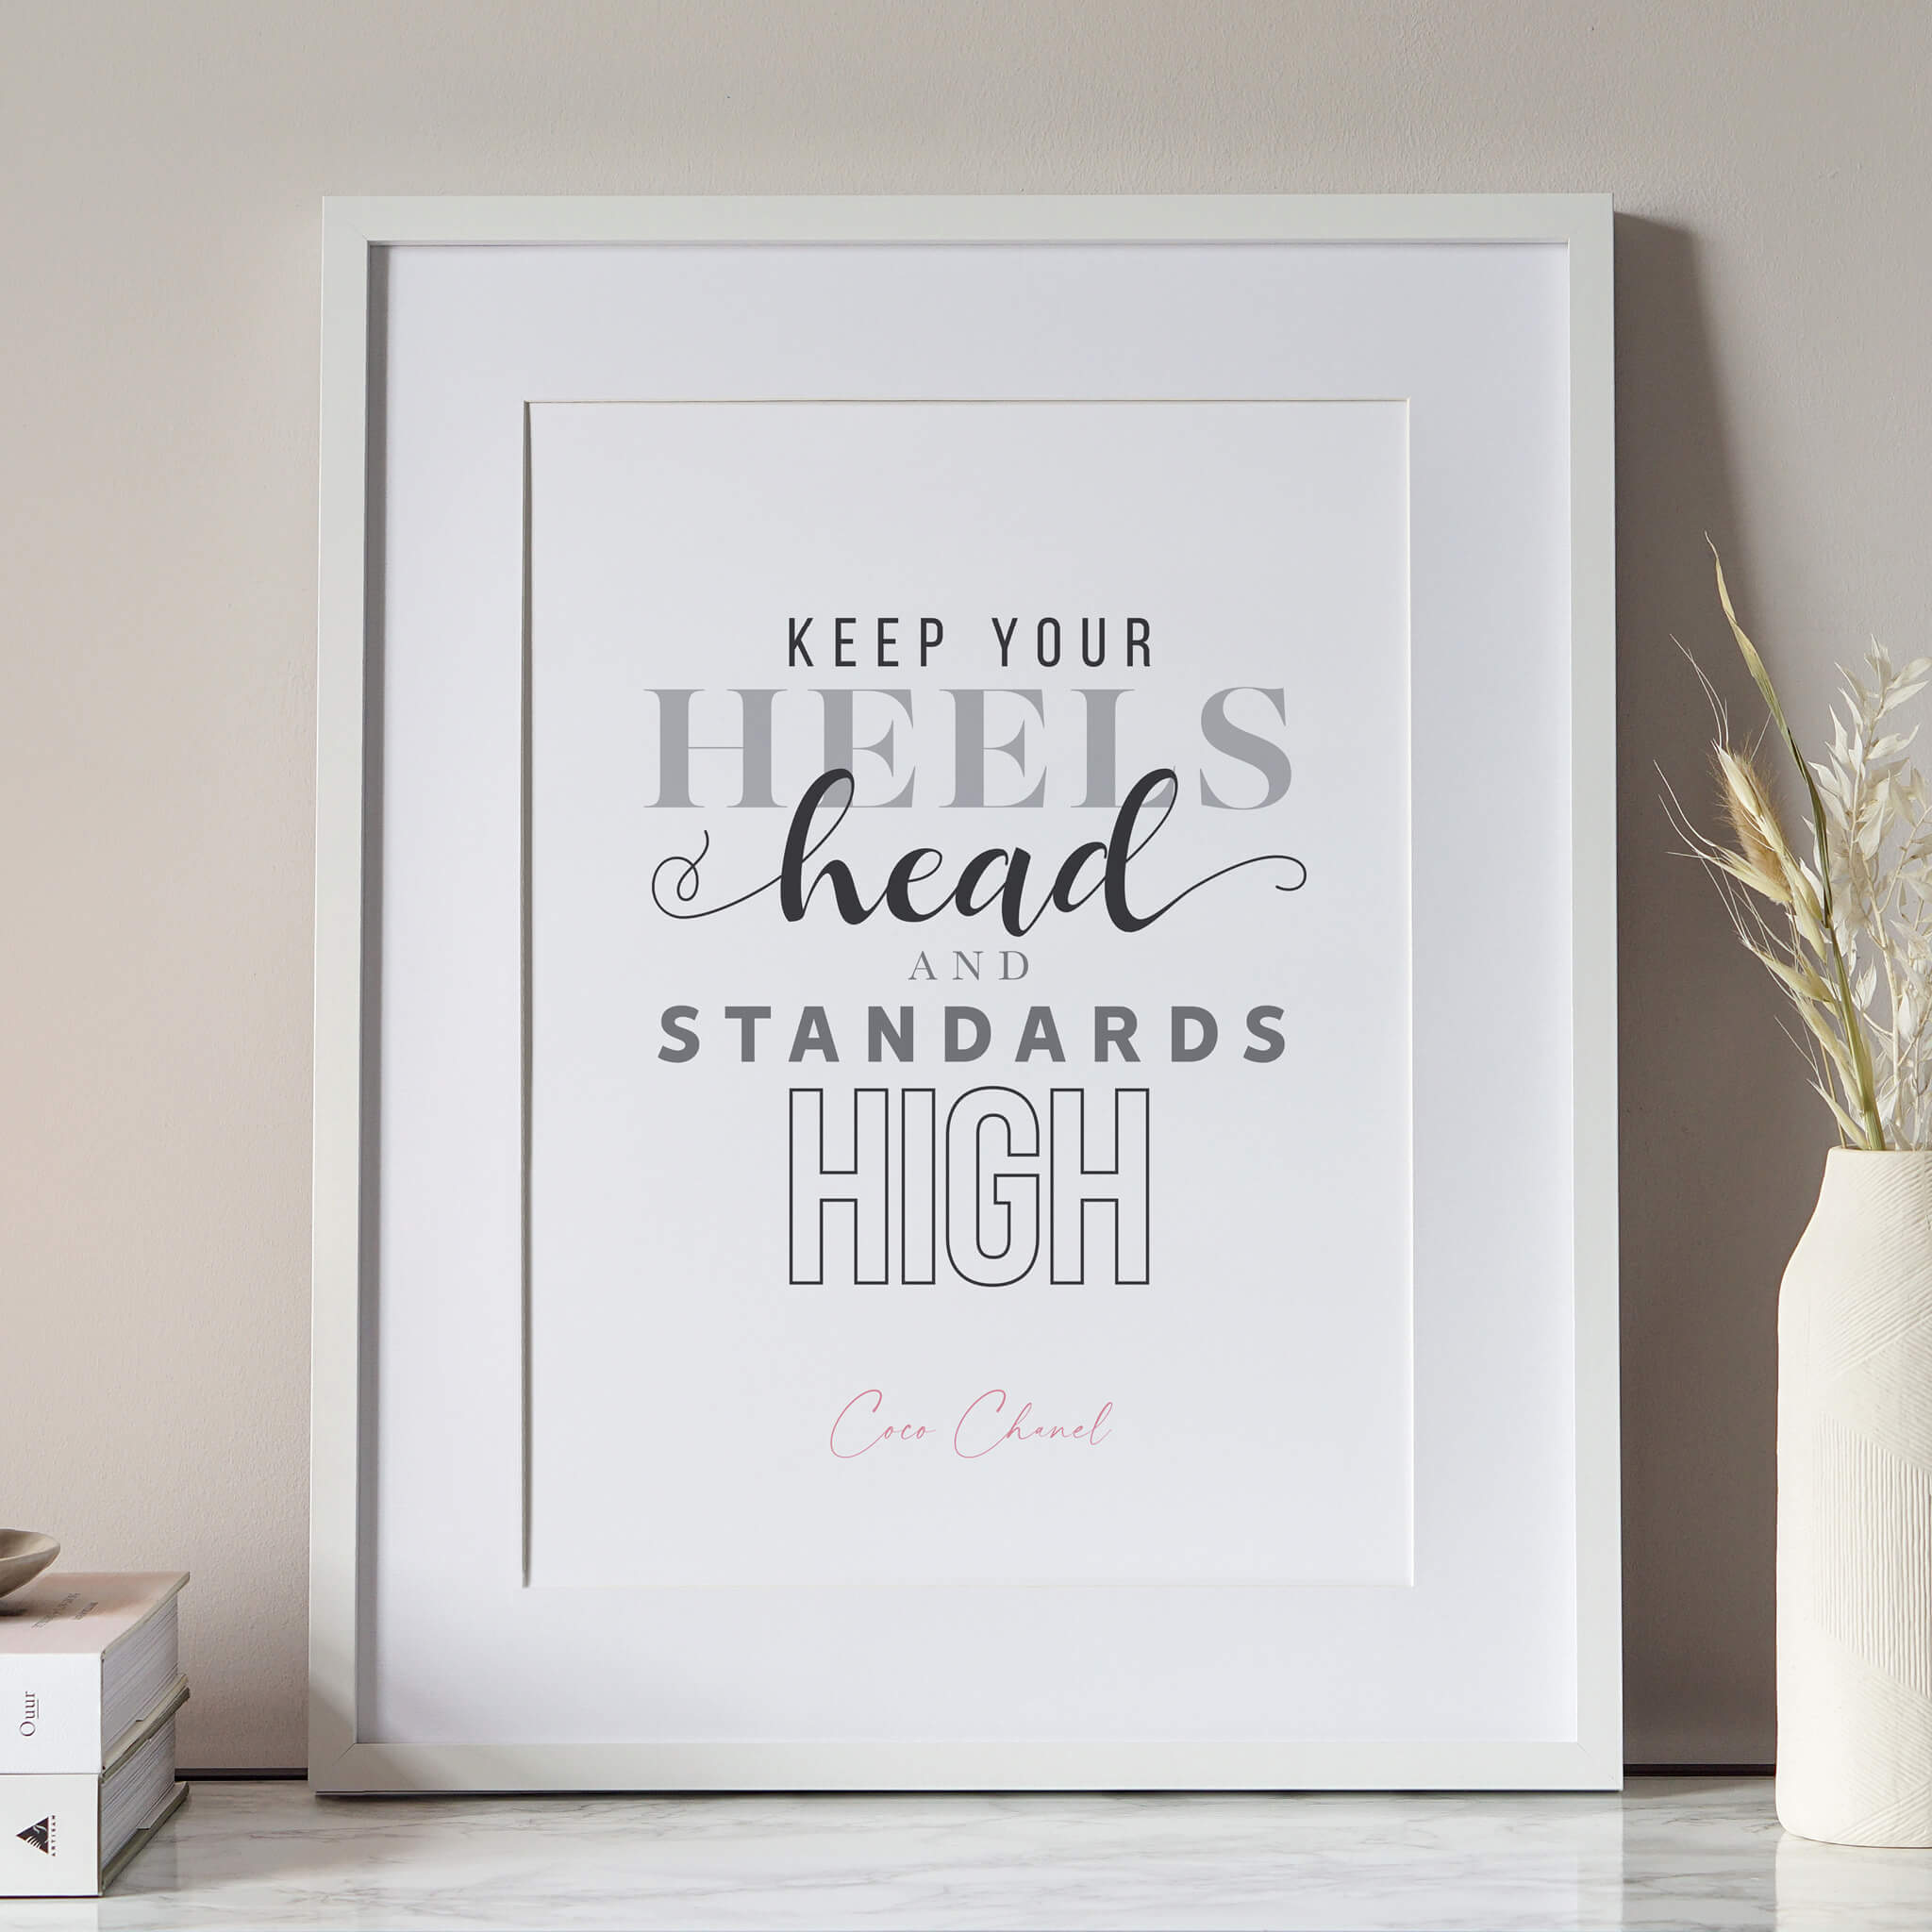 Keep Your Heels, Head and Standards High – Jennifer Tune